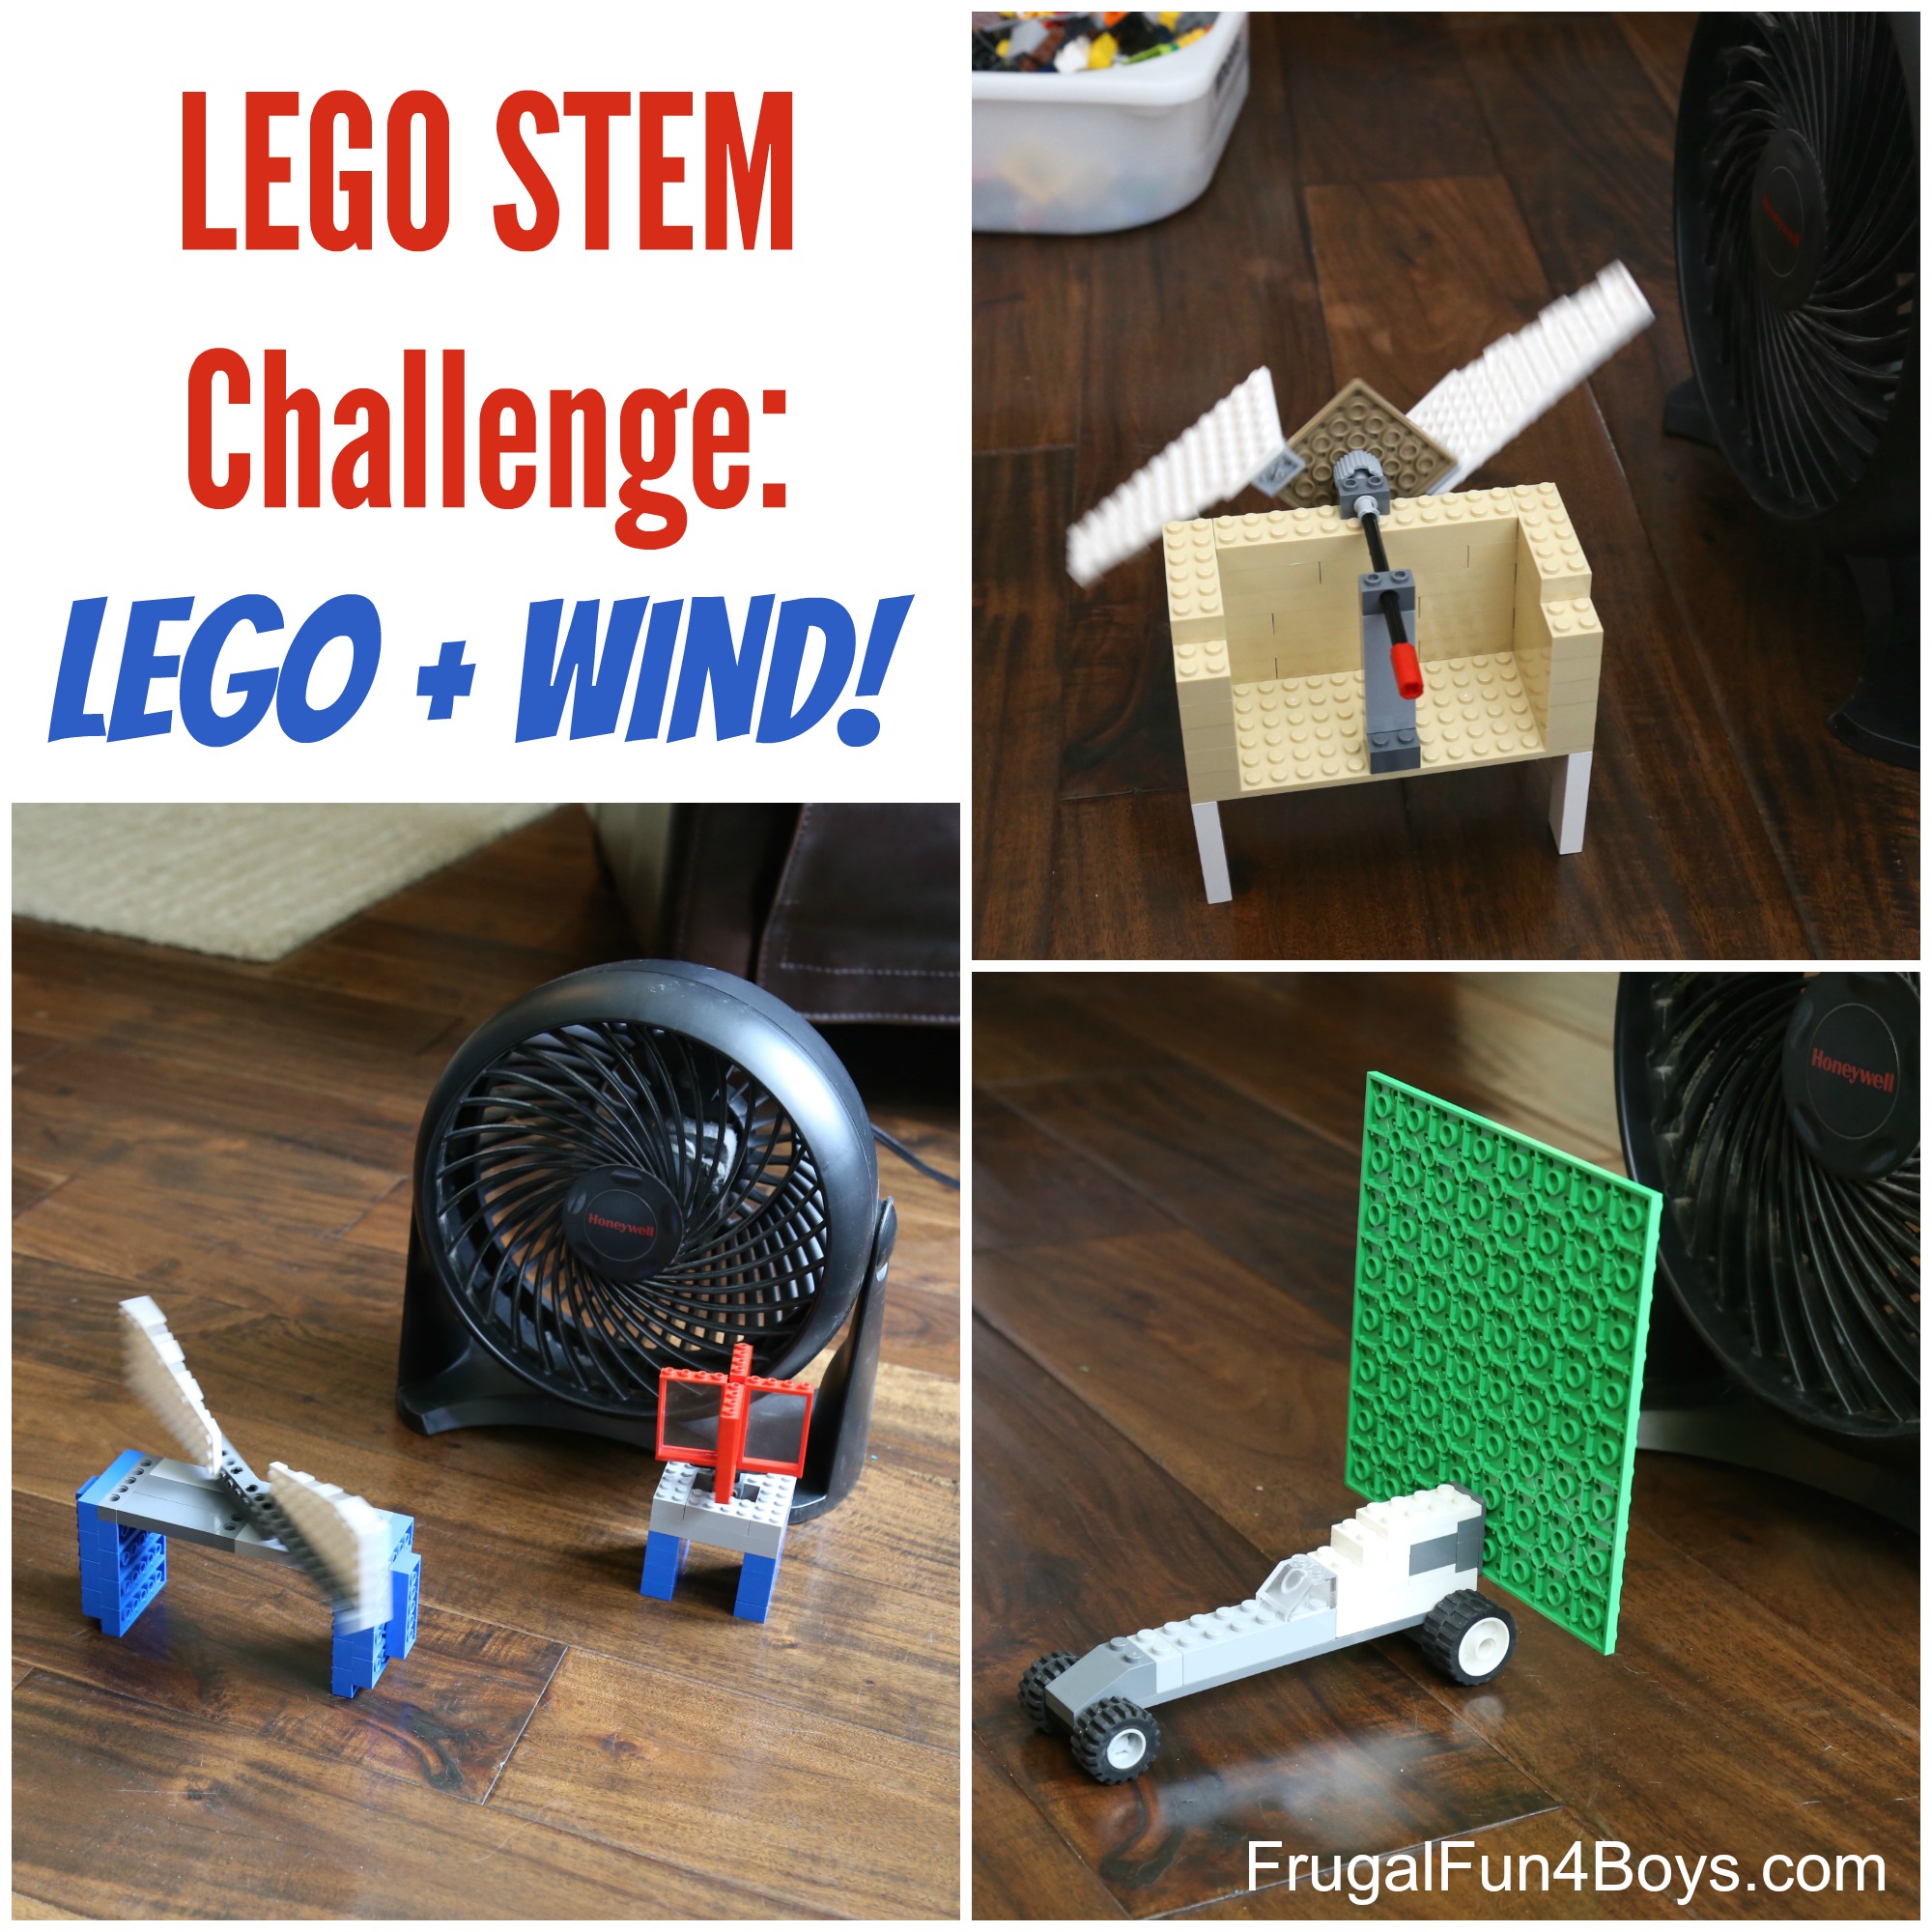 LEGO STEM Challenge: Wind Powered LEGO Contraptions!